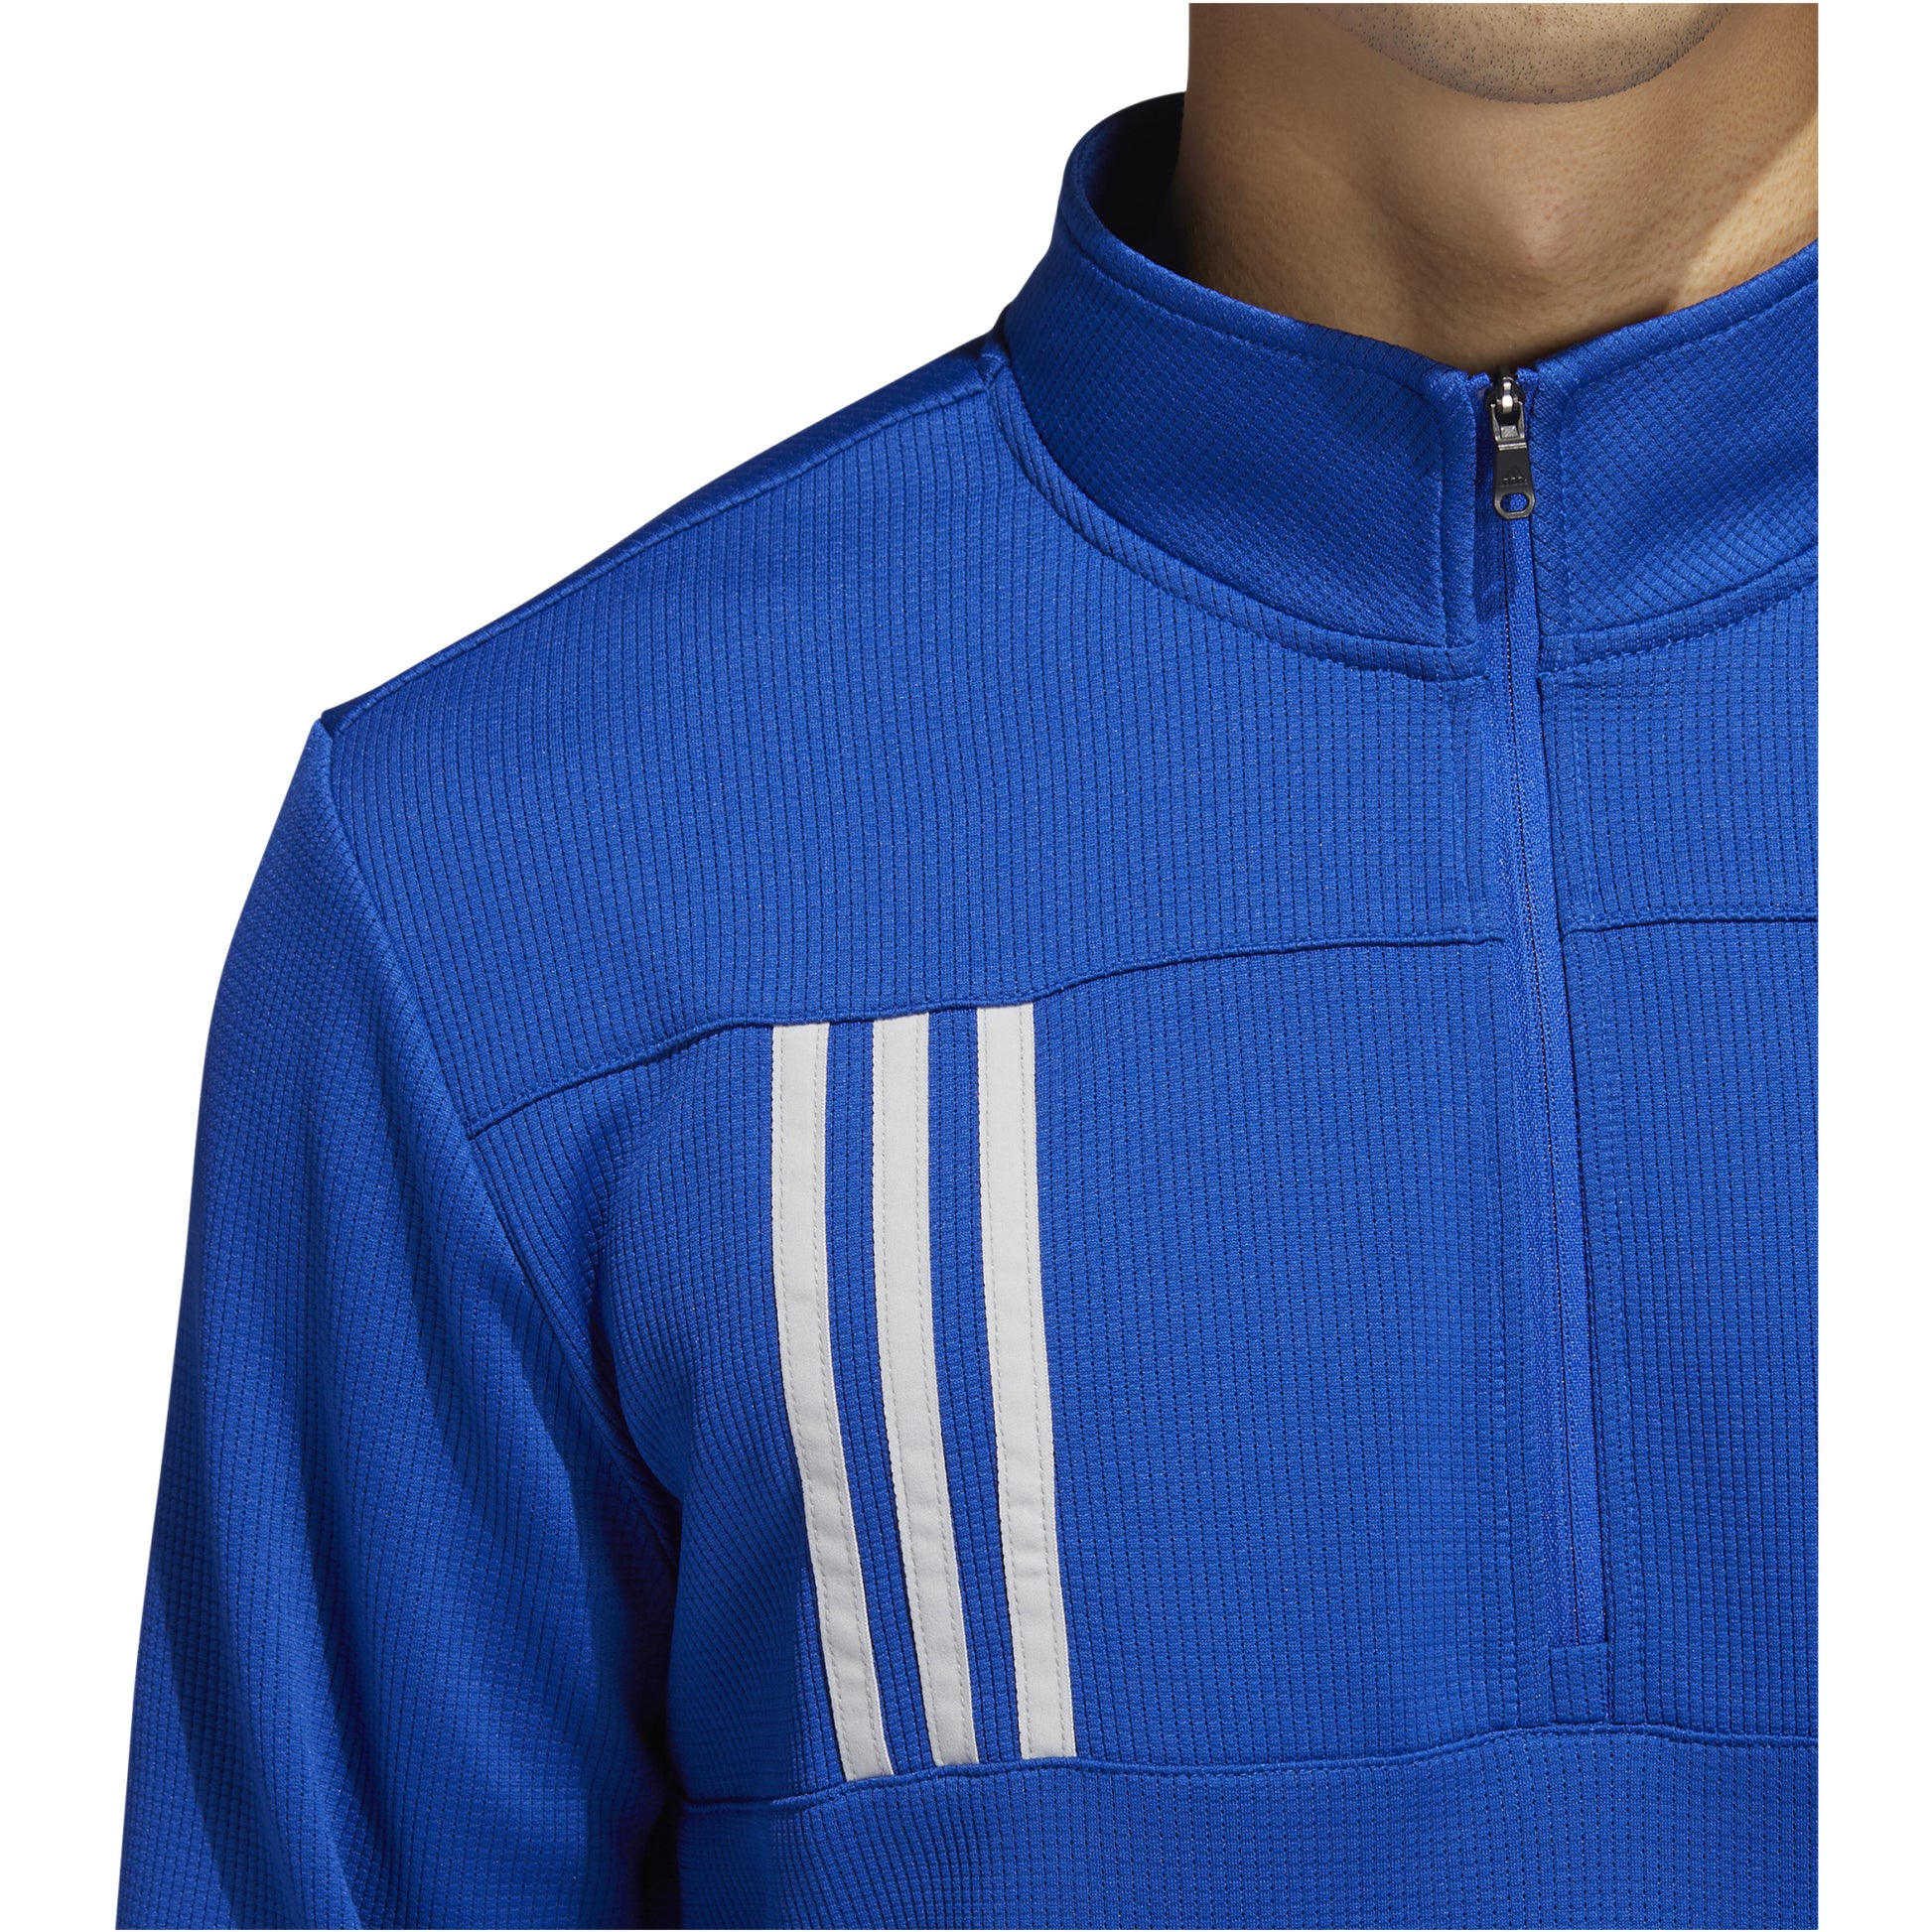 Textured 1/4 Zip Golf Pullover 3-Stripes – Products Team